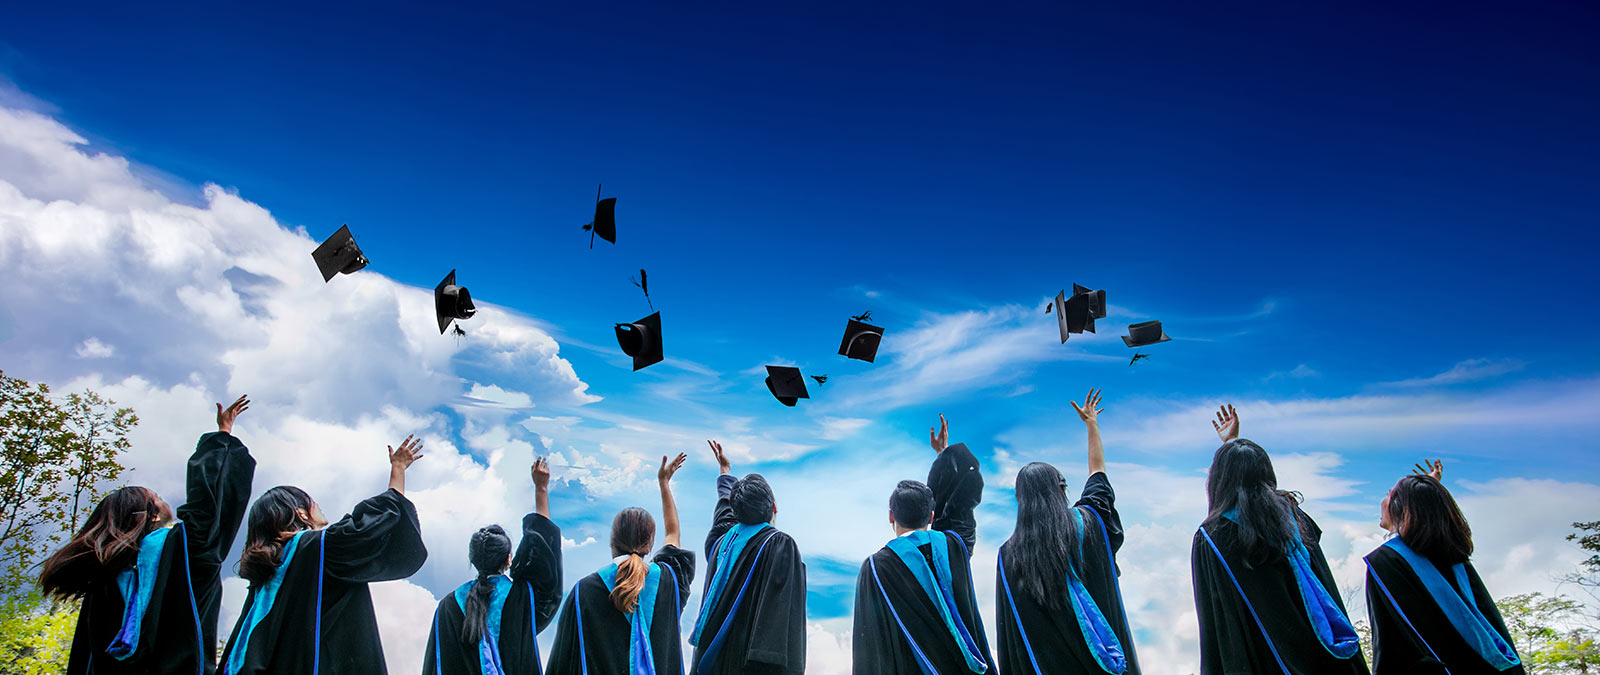 Photo of graduates tossing hats into the air with clouds and a blue sky